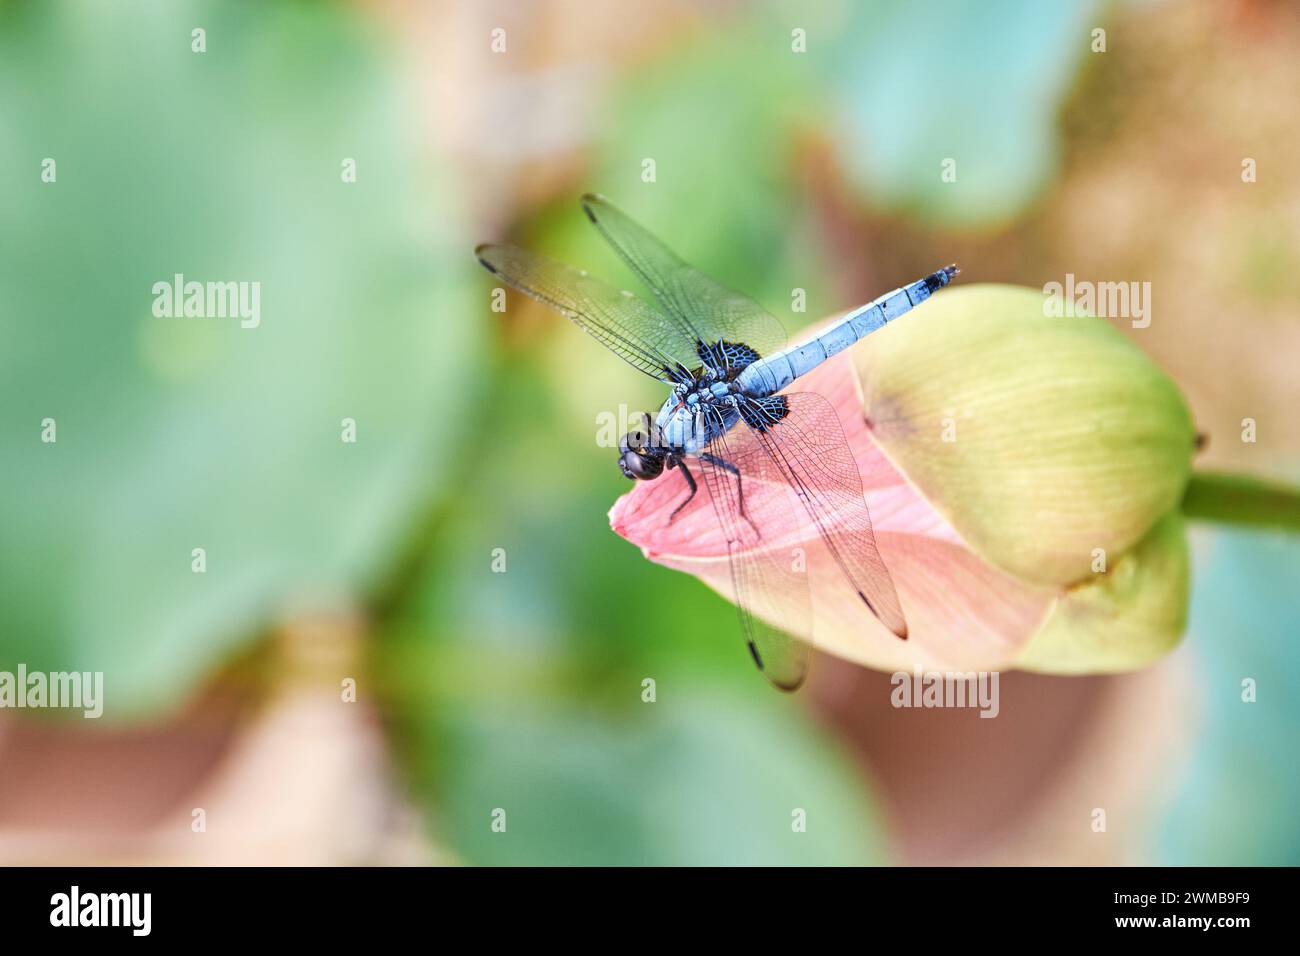 Blue-tailed forest hawk (Orthetrum triangulare melania), dragonfly; Hiroshima Prefecture, Japan Stock Photo